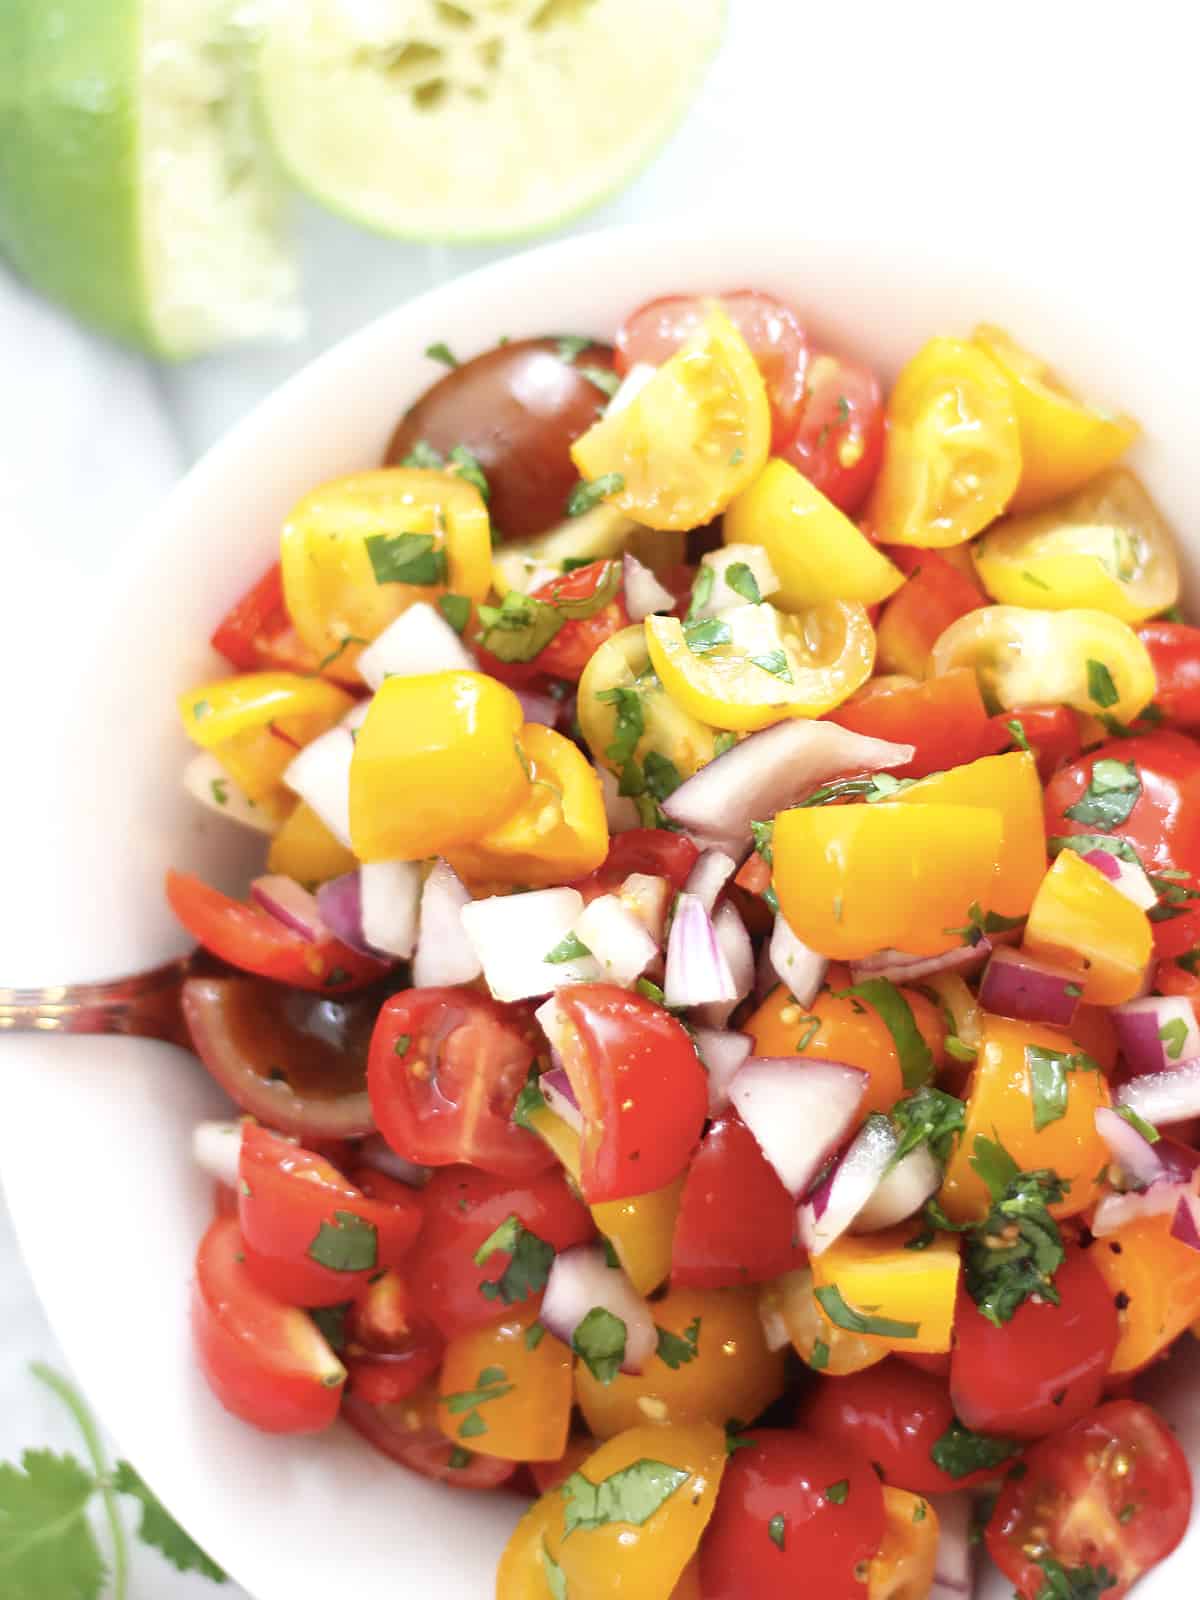 Chopped cherry tomatoes in a bowl mixed with red onion and cilantro.